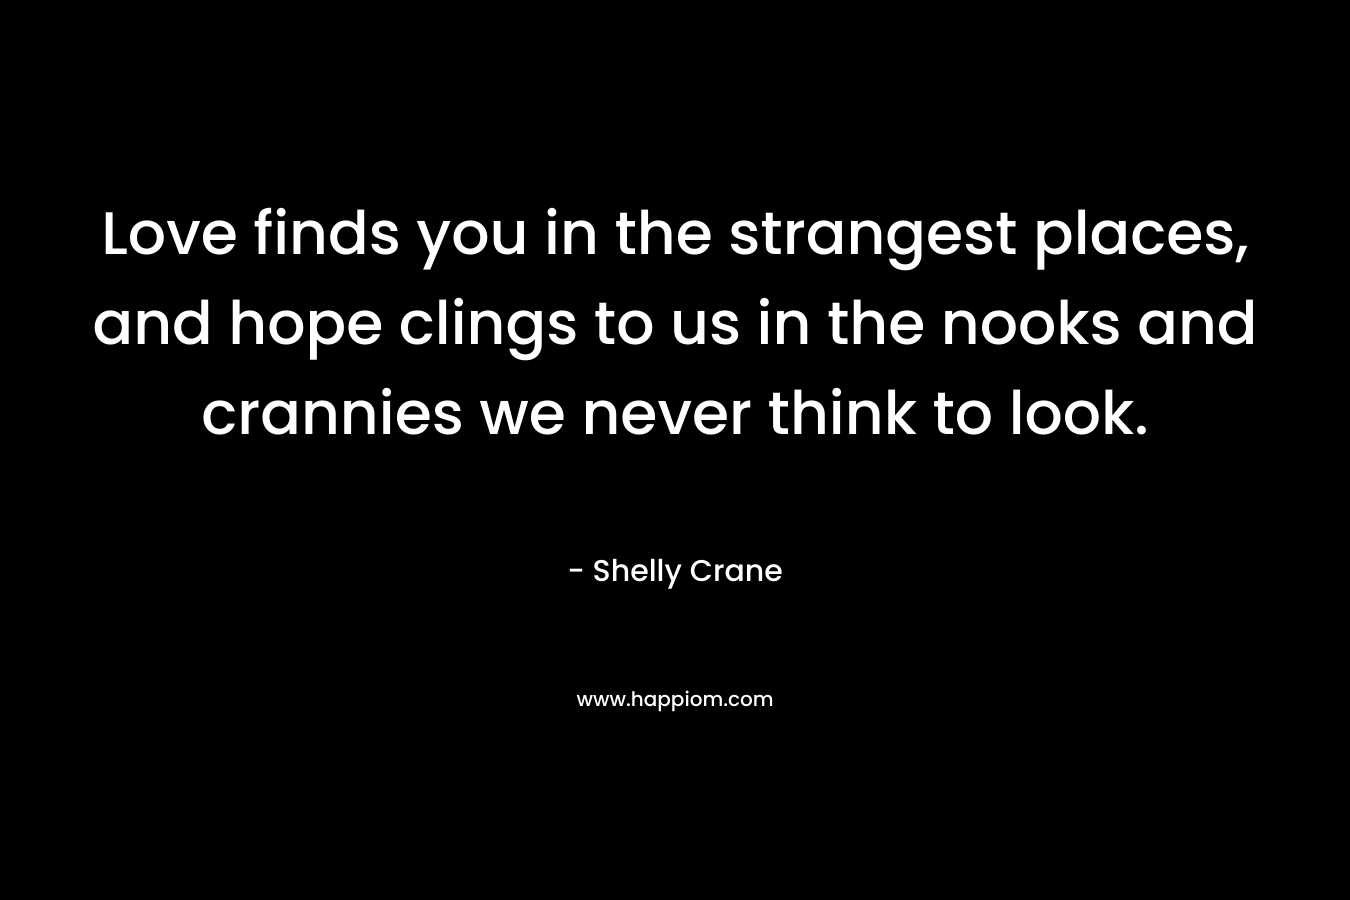 Love finds you in the strangest places, and hope clings to us in the nooks and crannies we never think to look. – Shelly Crane